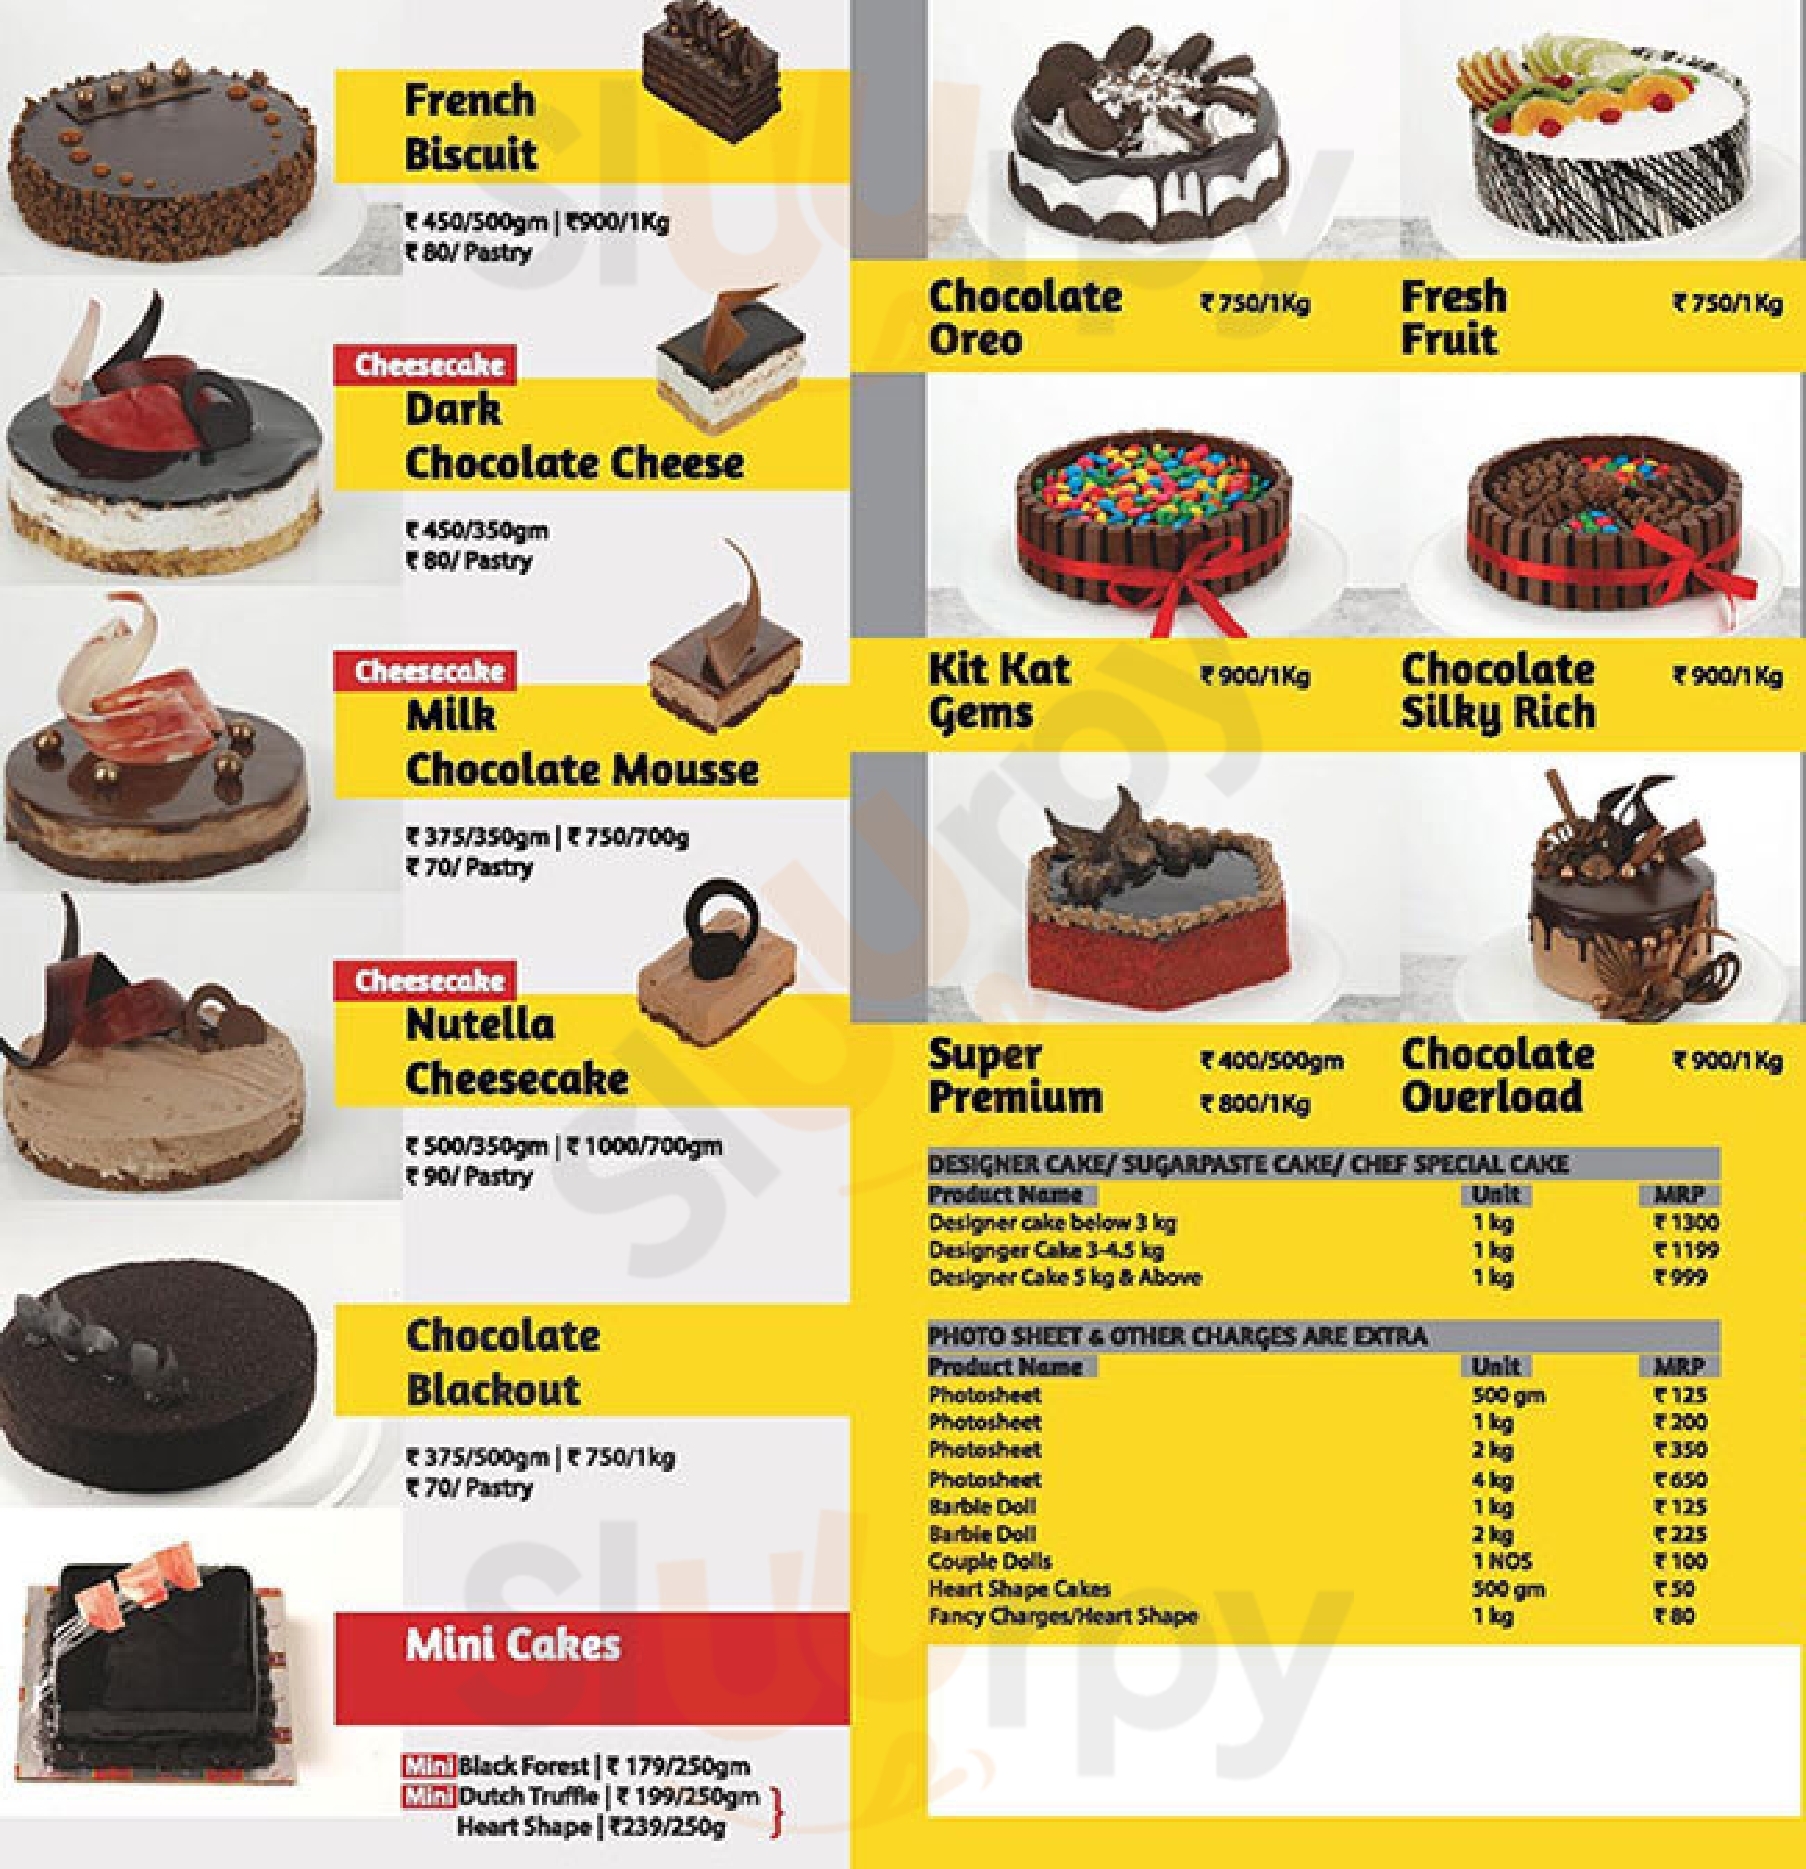 Fresh Fruit Cake in Vadodara at best price by Tgb Cafe & Bakery (Closed  Down) - Justdial